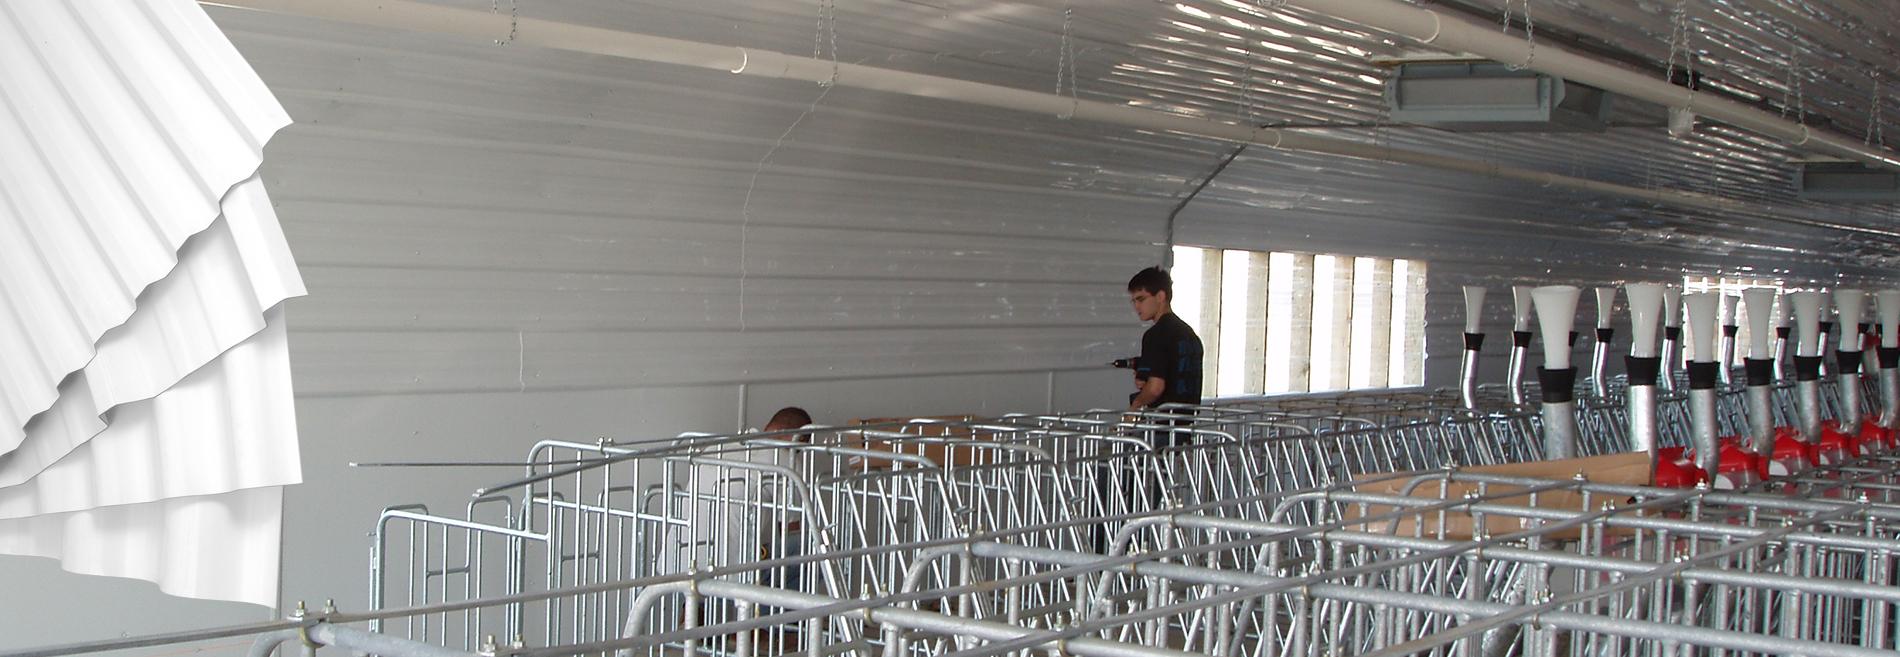 Corrugated PVC liner panels for industrial and agricultural interior cladding